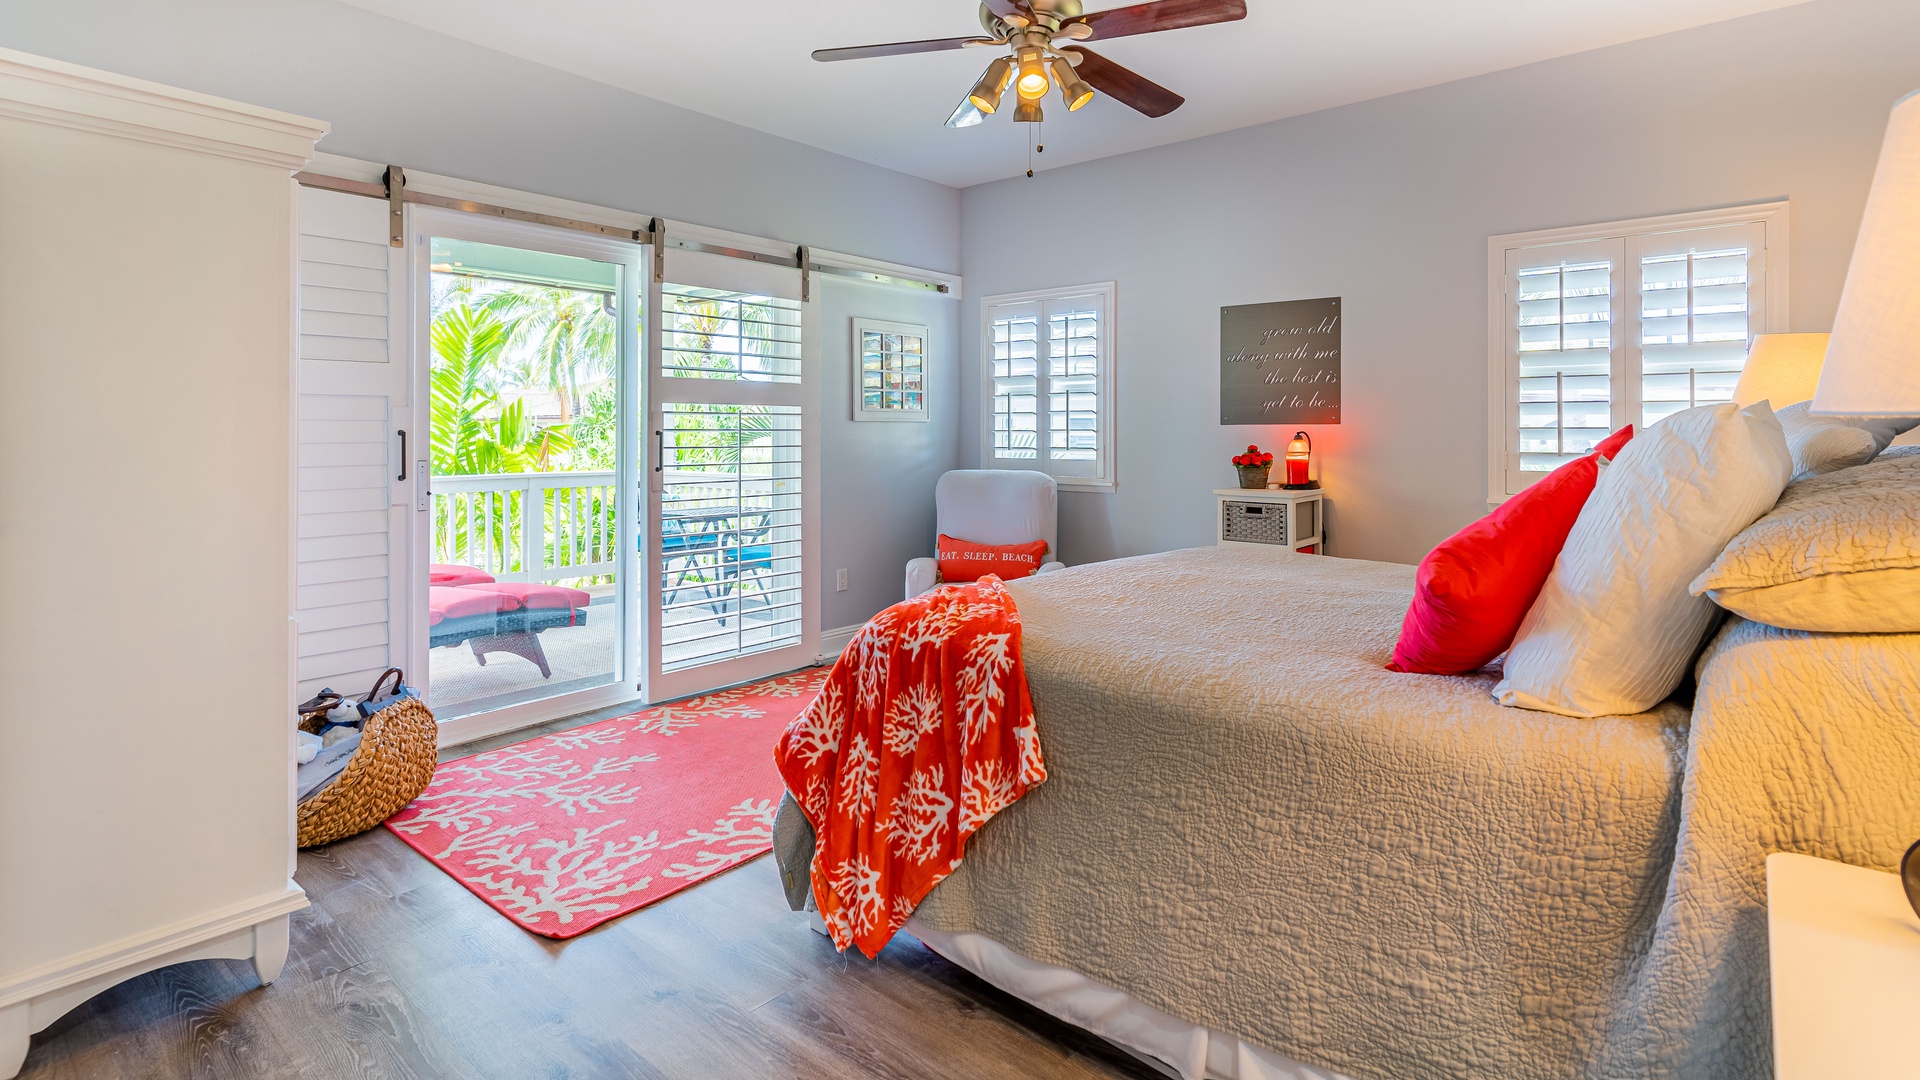 Kapolei Vacation Rentals, Coconut Plantation 1074-4 - The primary guest bedroom with bright accents and access to the lanai.